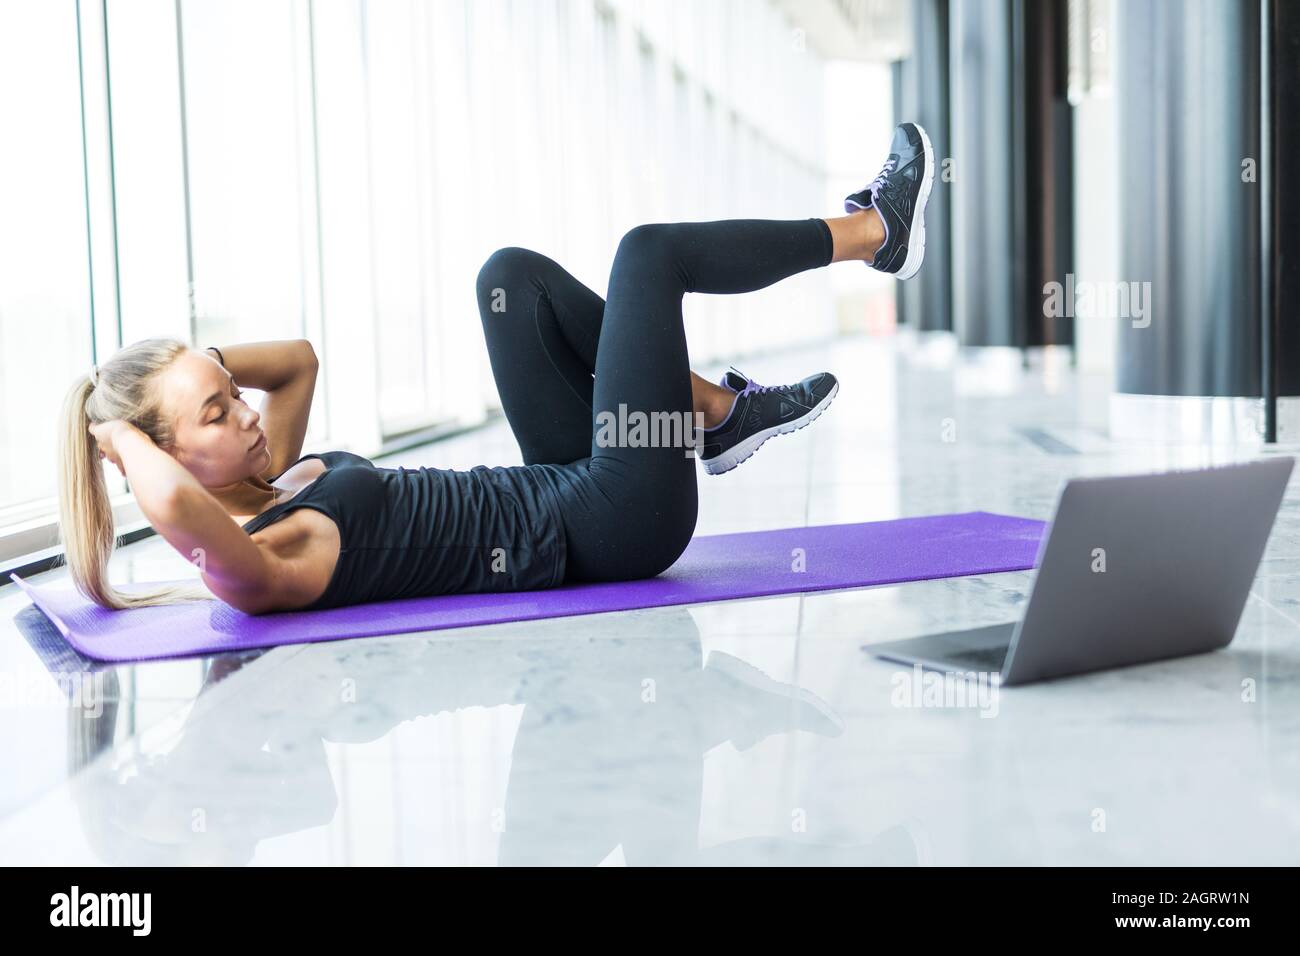 Girl makes yoga exercise online with laptop at gym Stock Photo